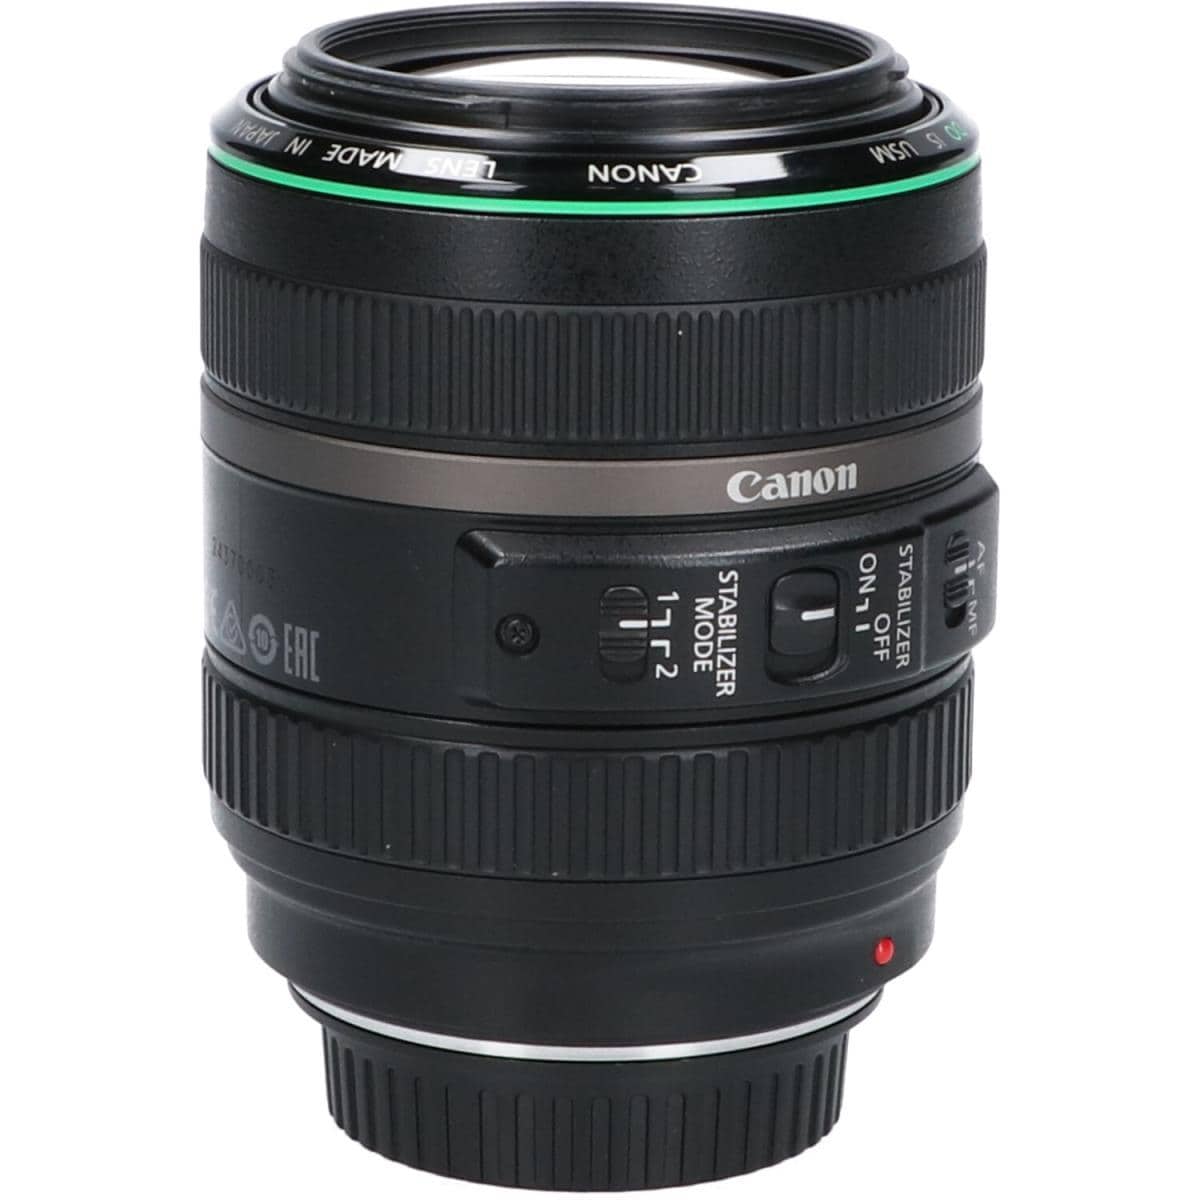 CANON EF70-300mm F4.5-5.6DO IS USM